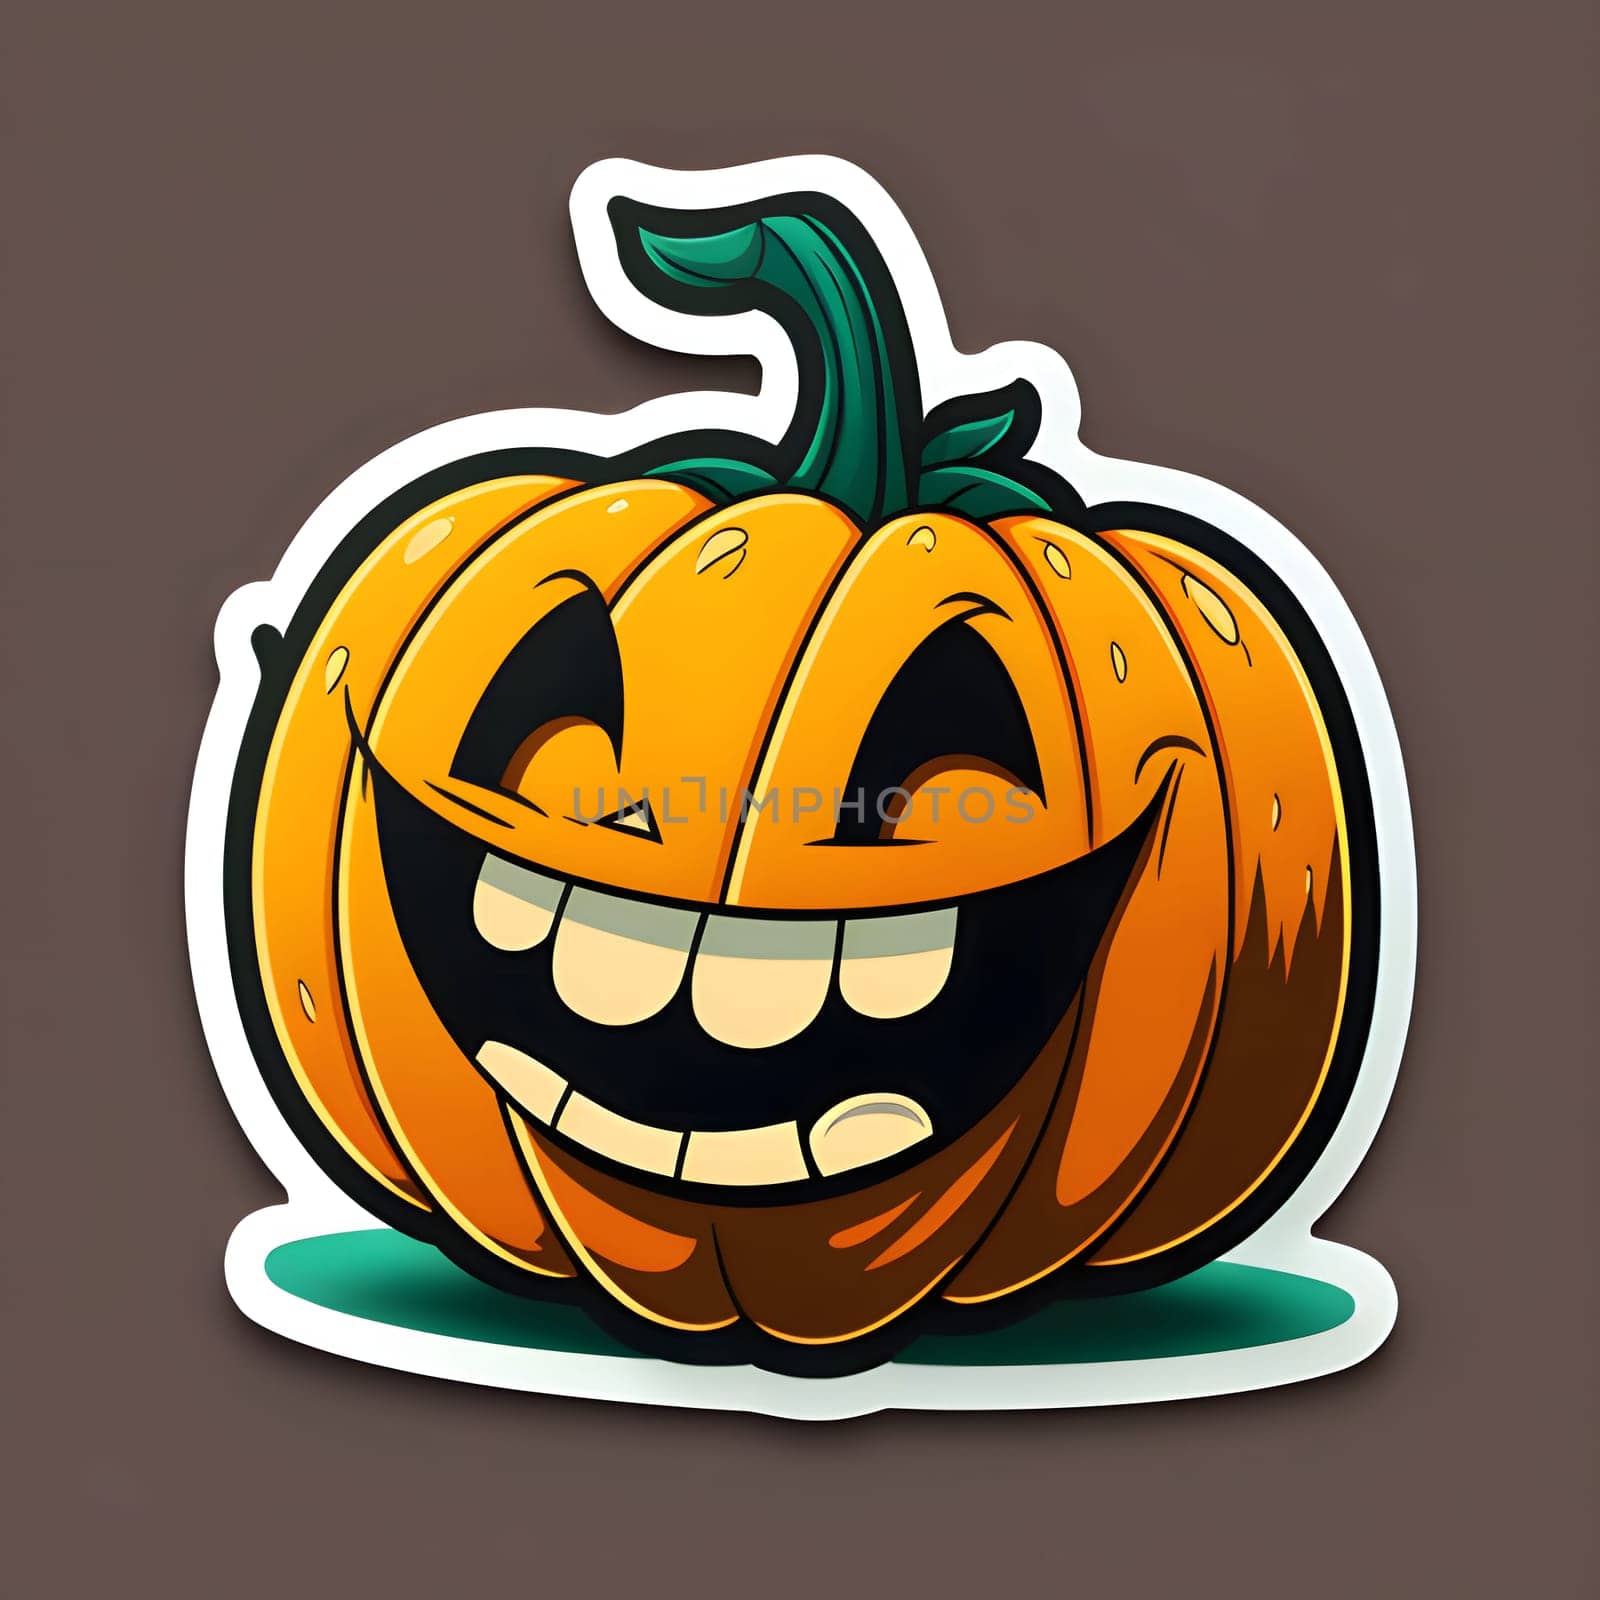 Laughing pumpkin sticker, Halloween image on a dark isolated background. by ThemesS